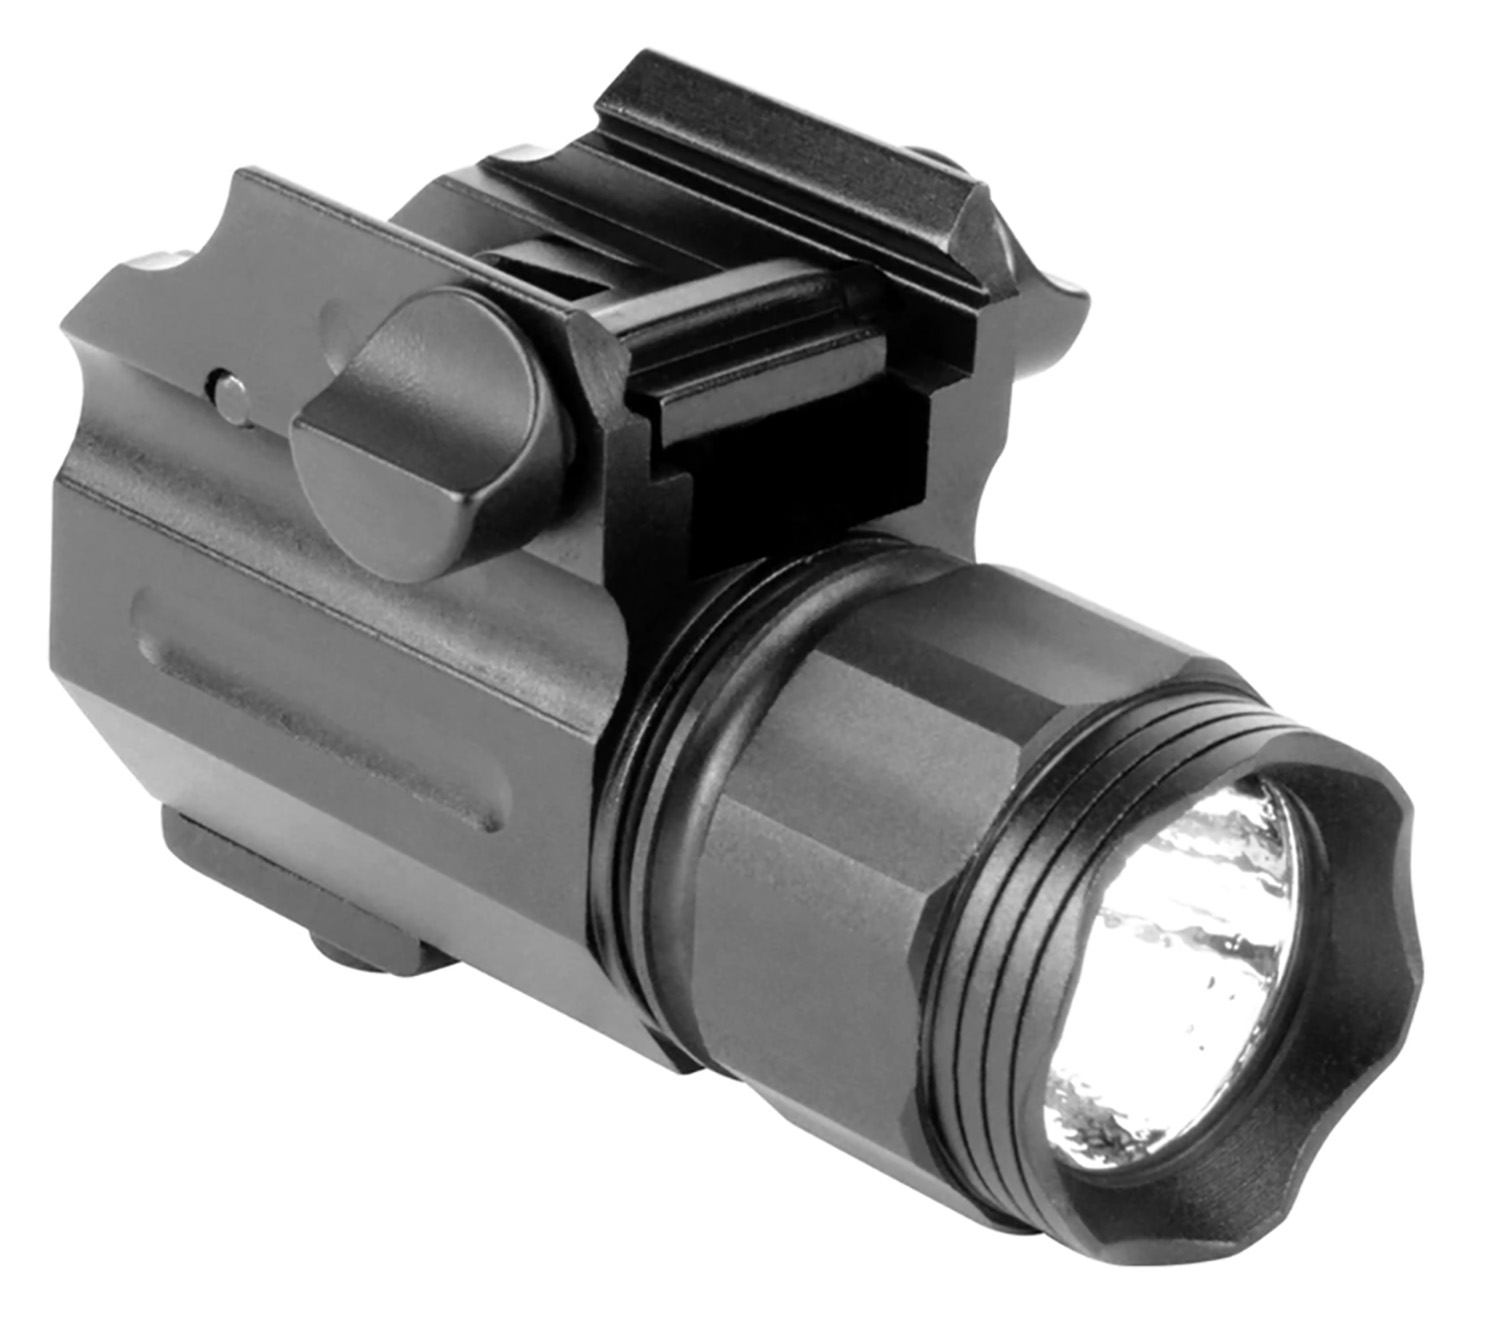 Aim Sports FQ330SC Sub-Compact Weapon Light For Sub-Compact Pistol w/Accessory Rail 330 Lumens Output White/Red/Green/Blue Cree LED Light Weaver Quick Release Mount Black Anodized Aluminum